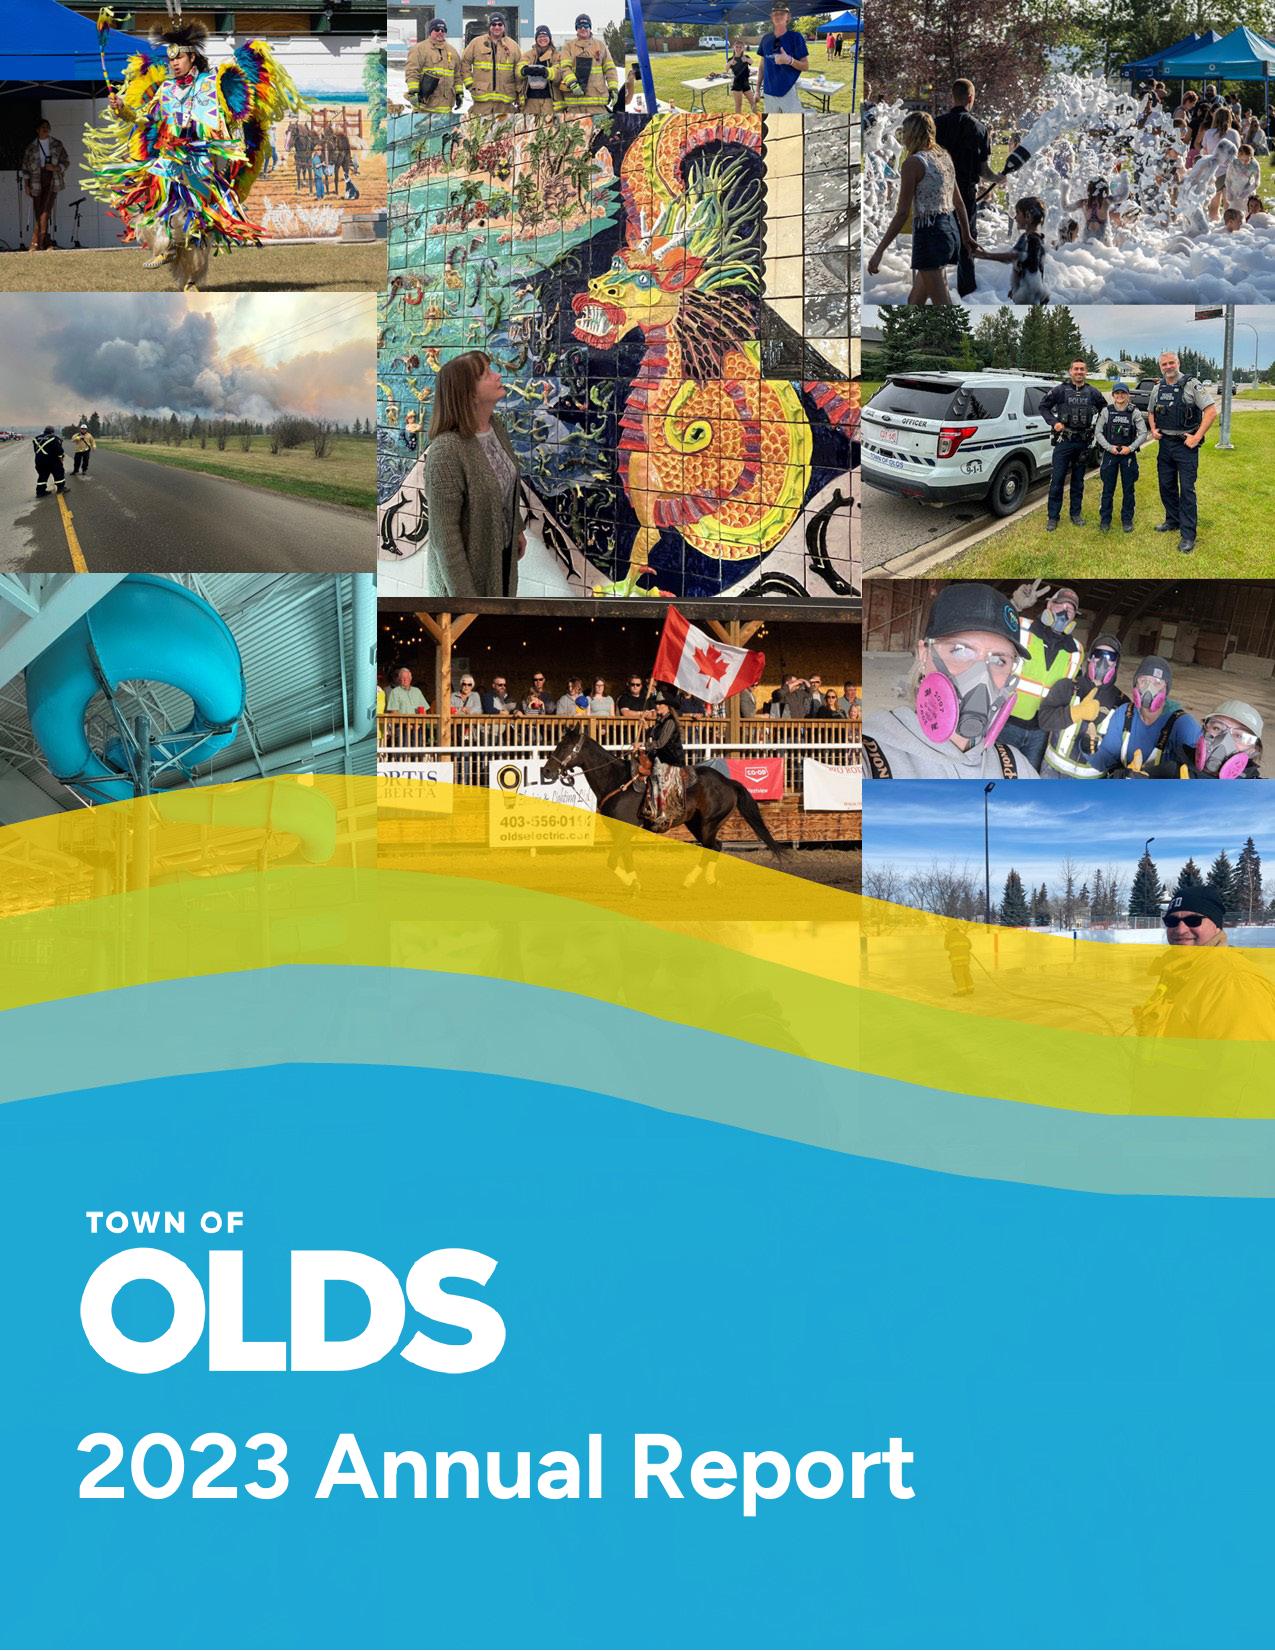 OLDS 2023 Annual Report